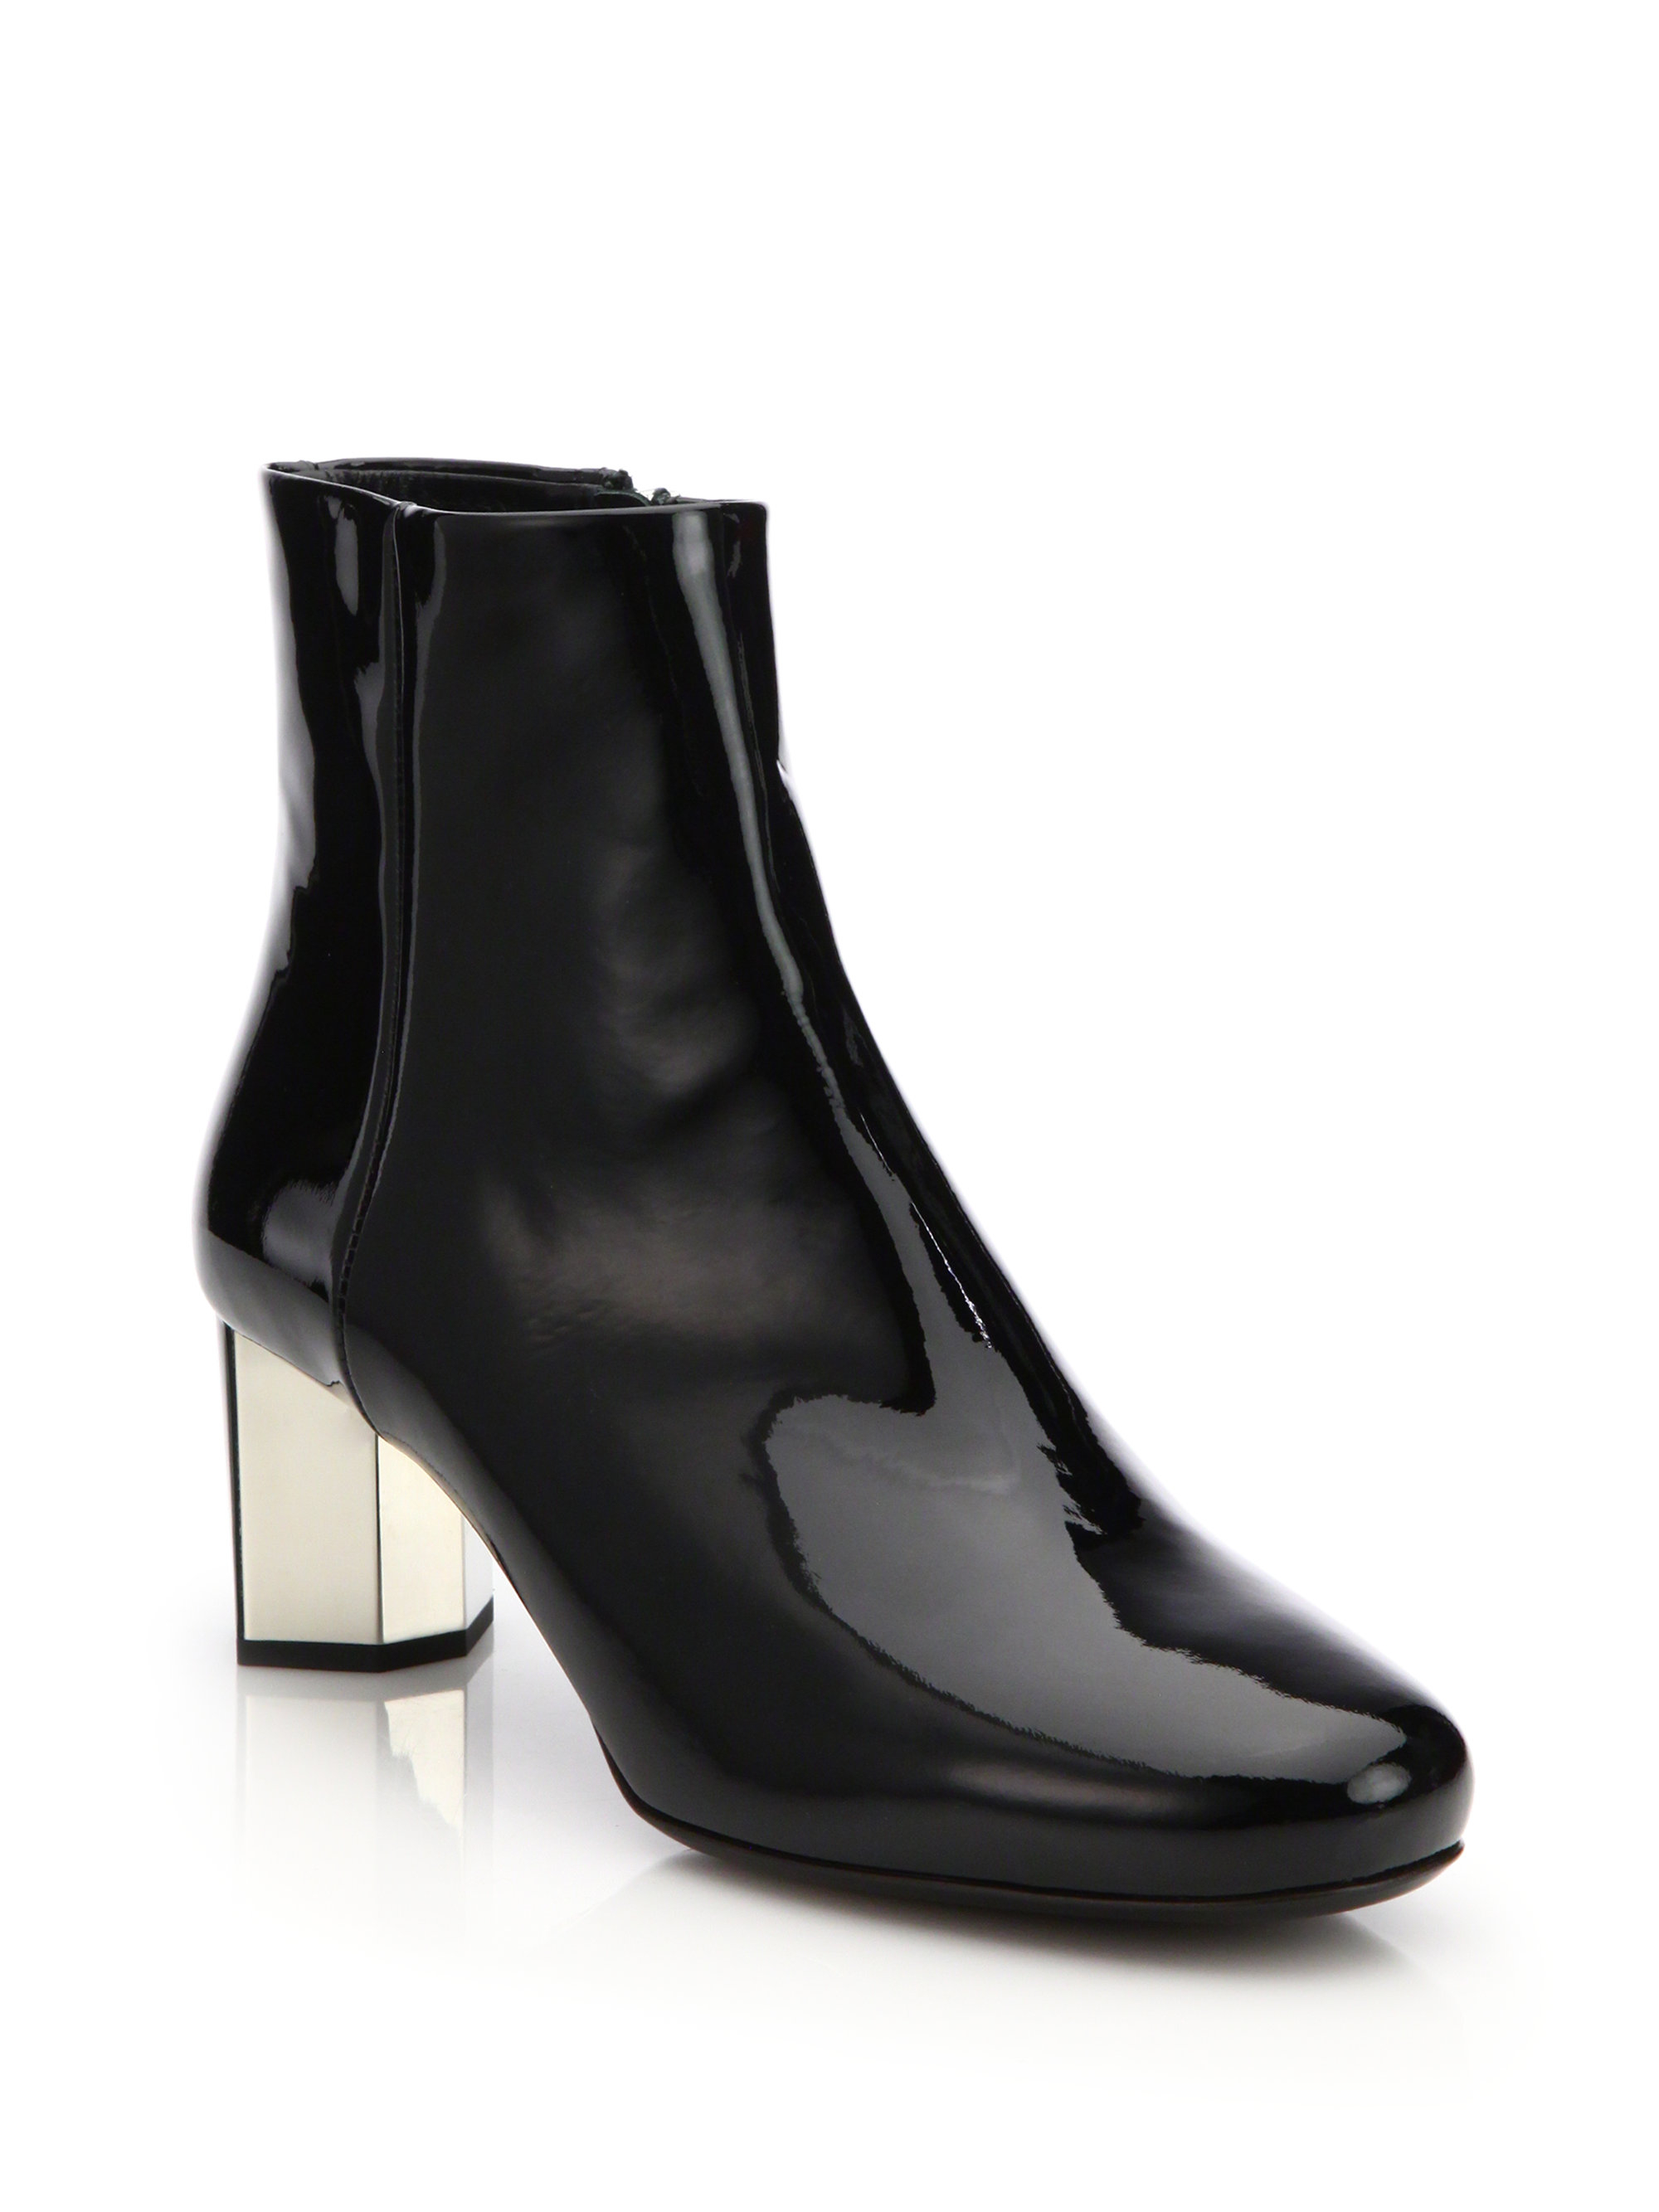 Prada Patent Leather Metal-heel Ankle Boots in Black - Lyst